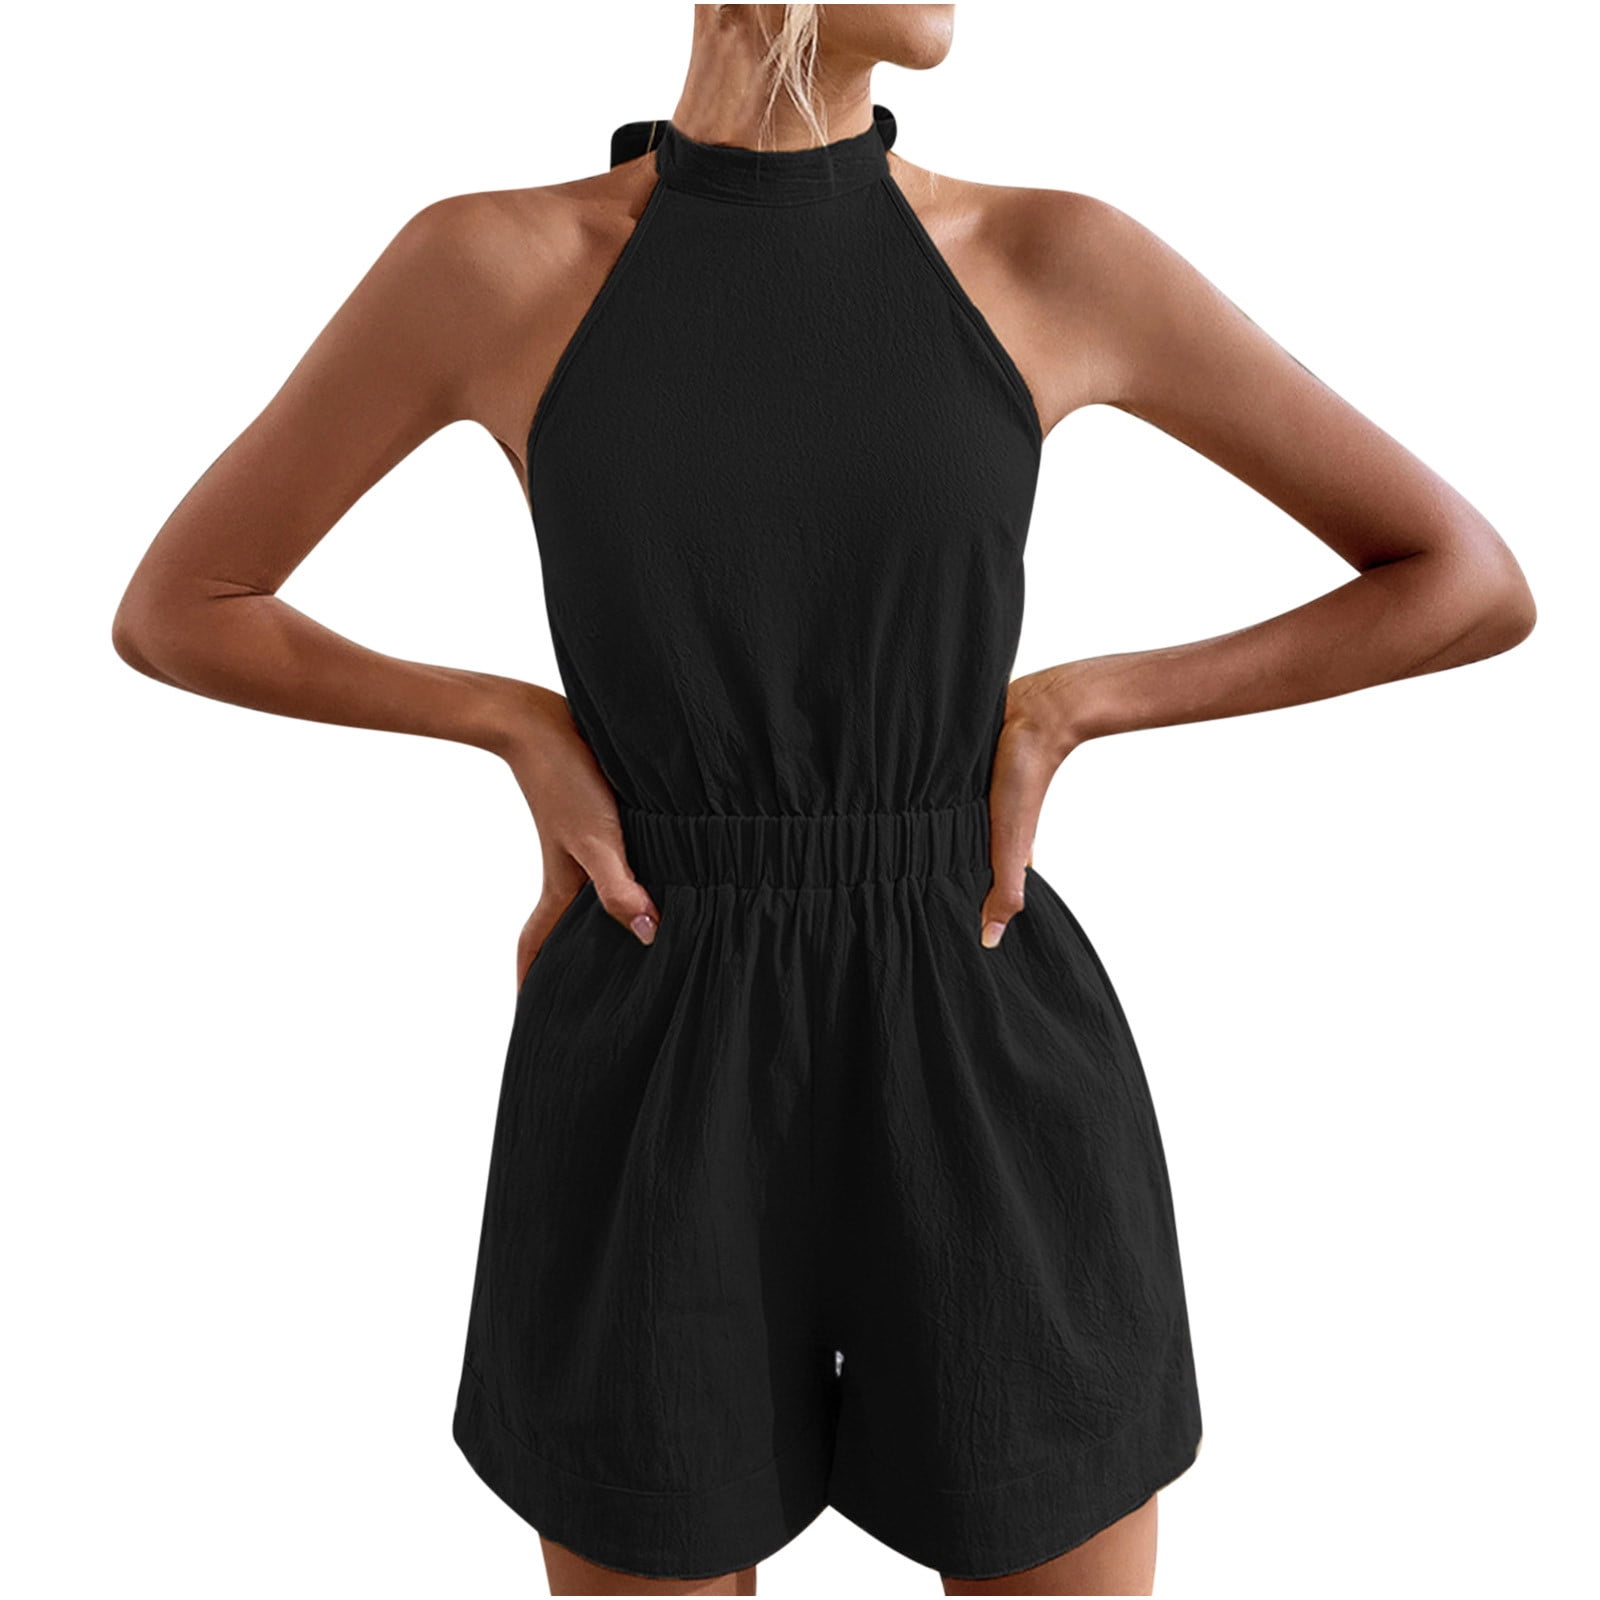 2018 Women Summer Bodysuit Rompers Womens Jumpsuit Sexy Backless Black  Shorts Bodycon Jumpsuits - Jumpsuits, Playsuits & Bodysuits - AliExpress